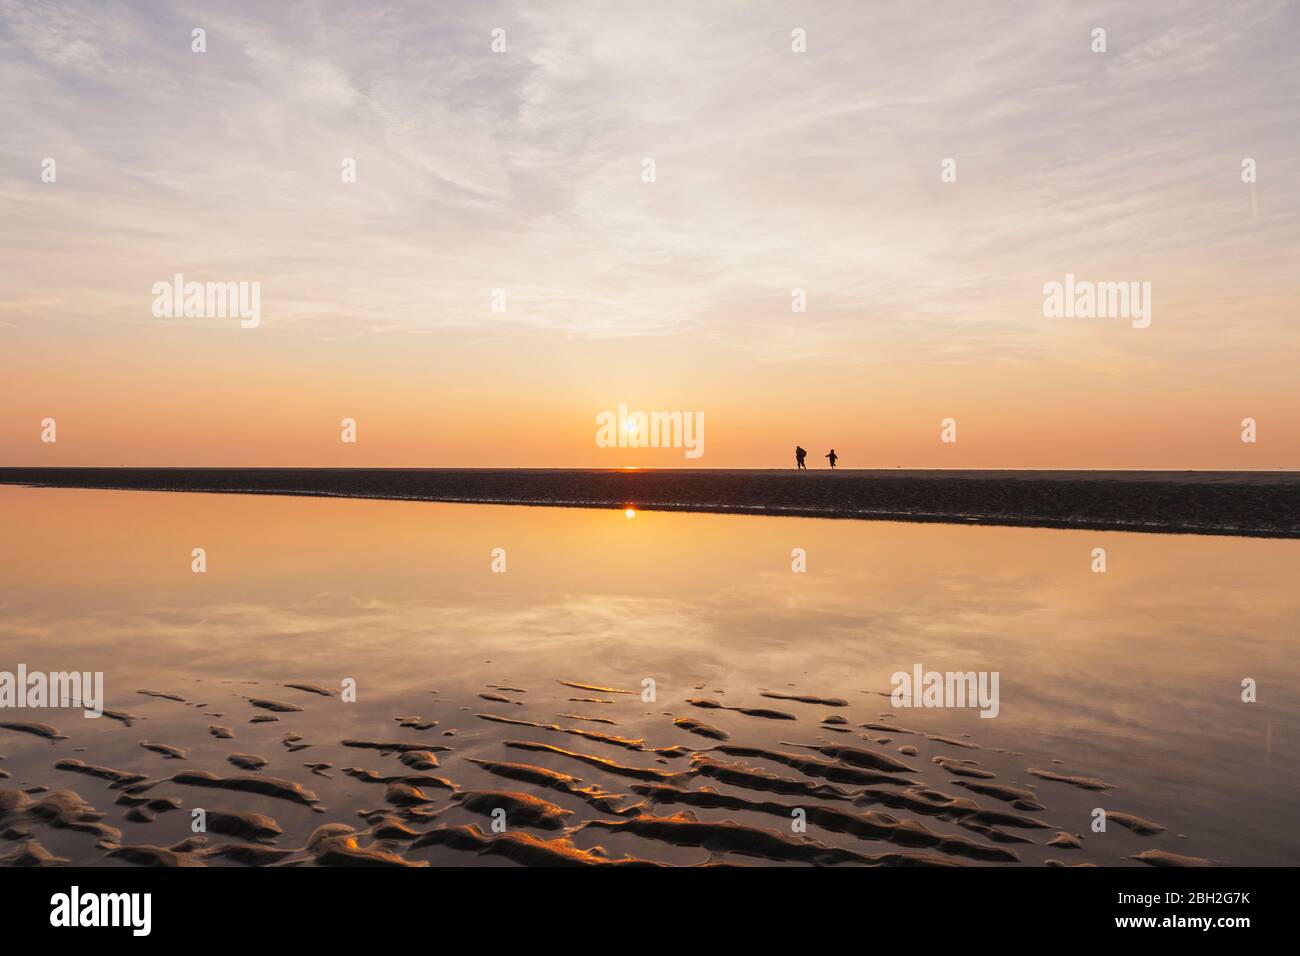 Distant view of silhouette people at beach against sky during sunset, North Sea Coast, Flanders, Belgium Stock Photo